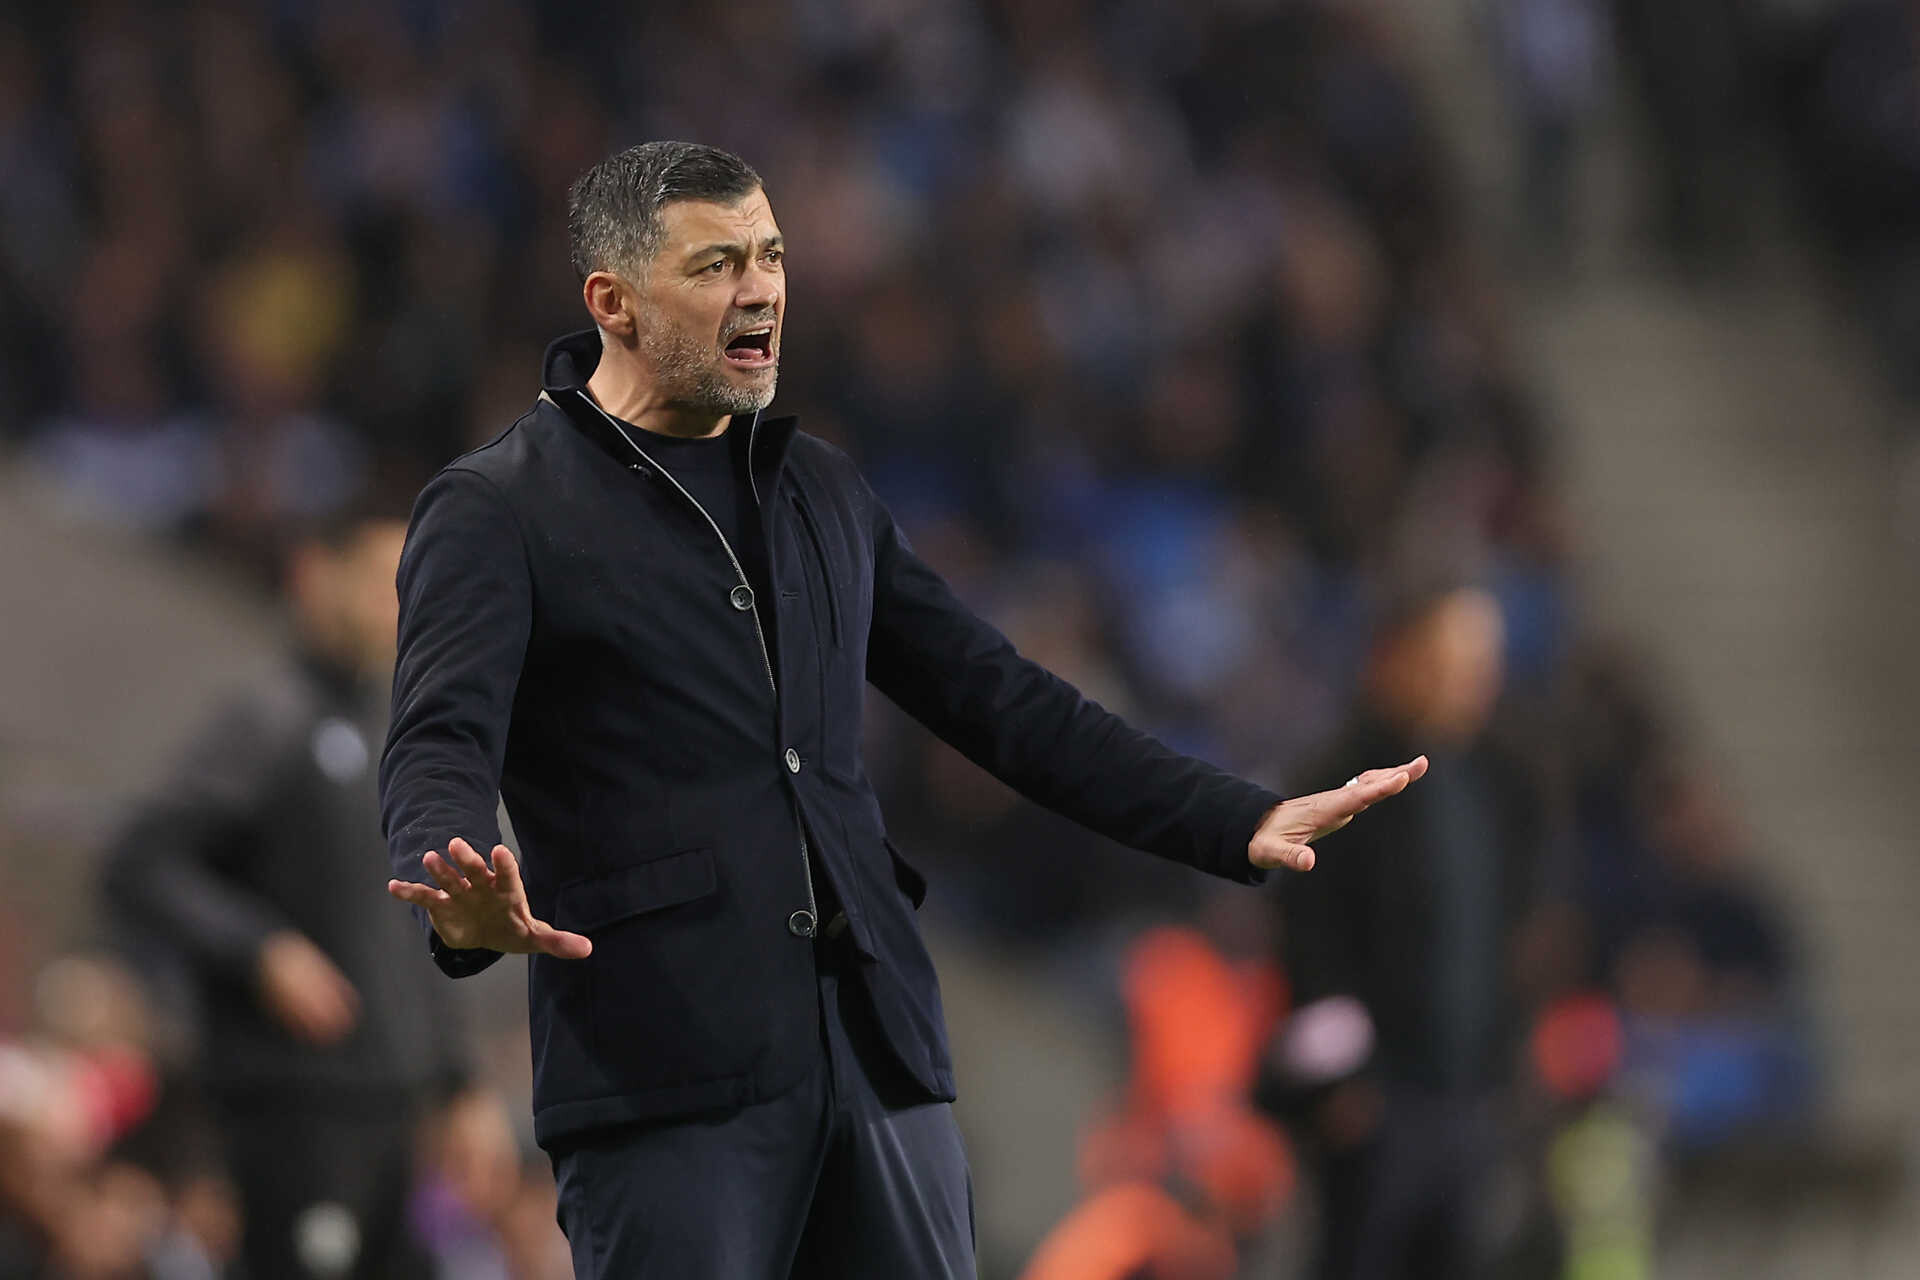 “There was no aggression on the part of Sergio Conceicao,” says a witness to the match in Huelva